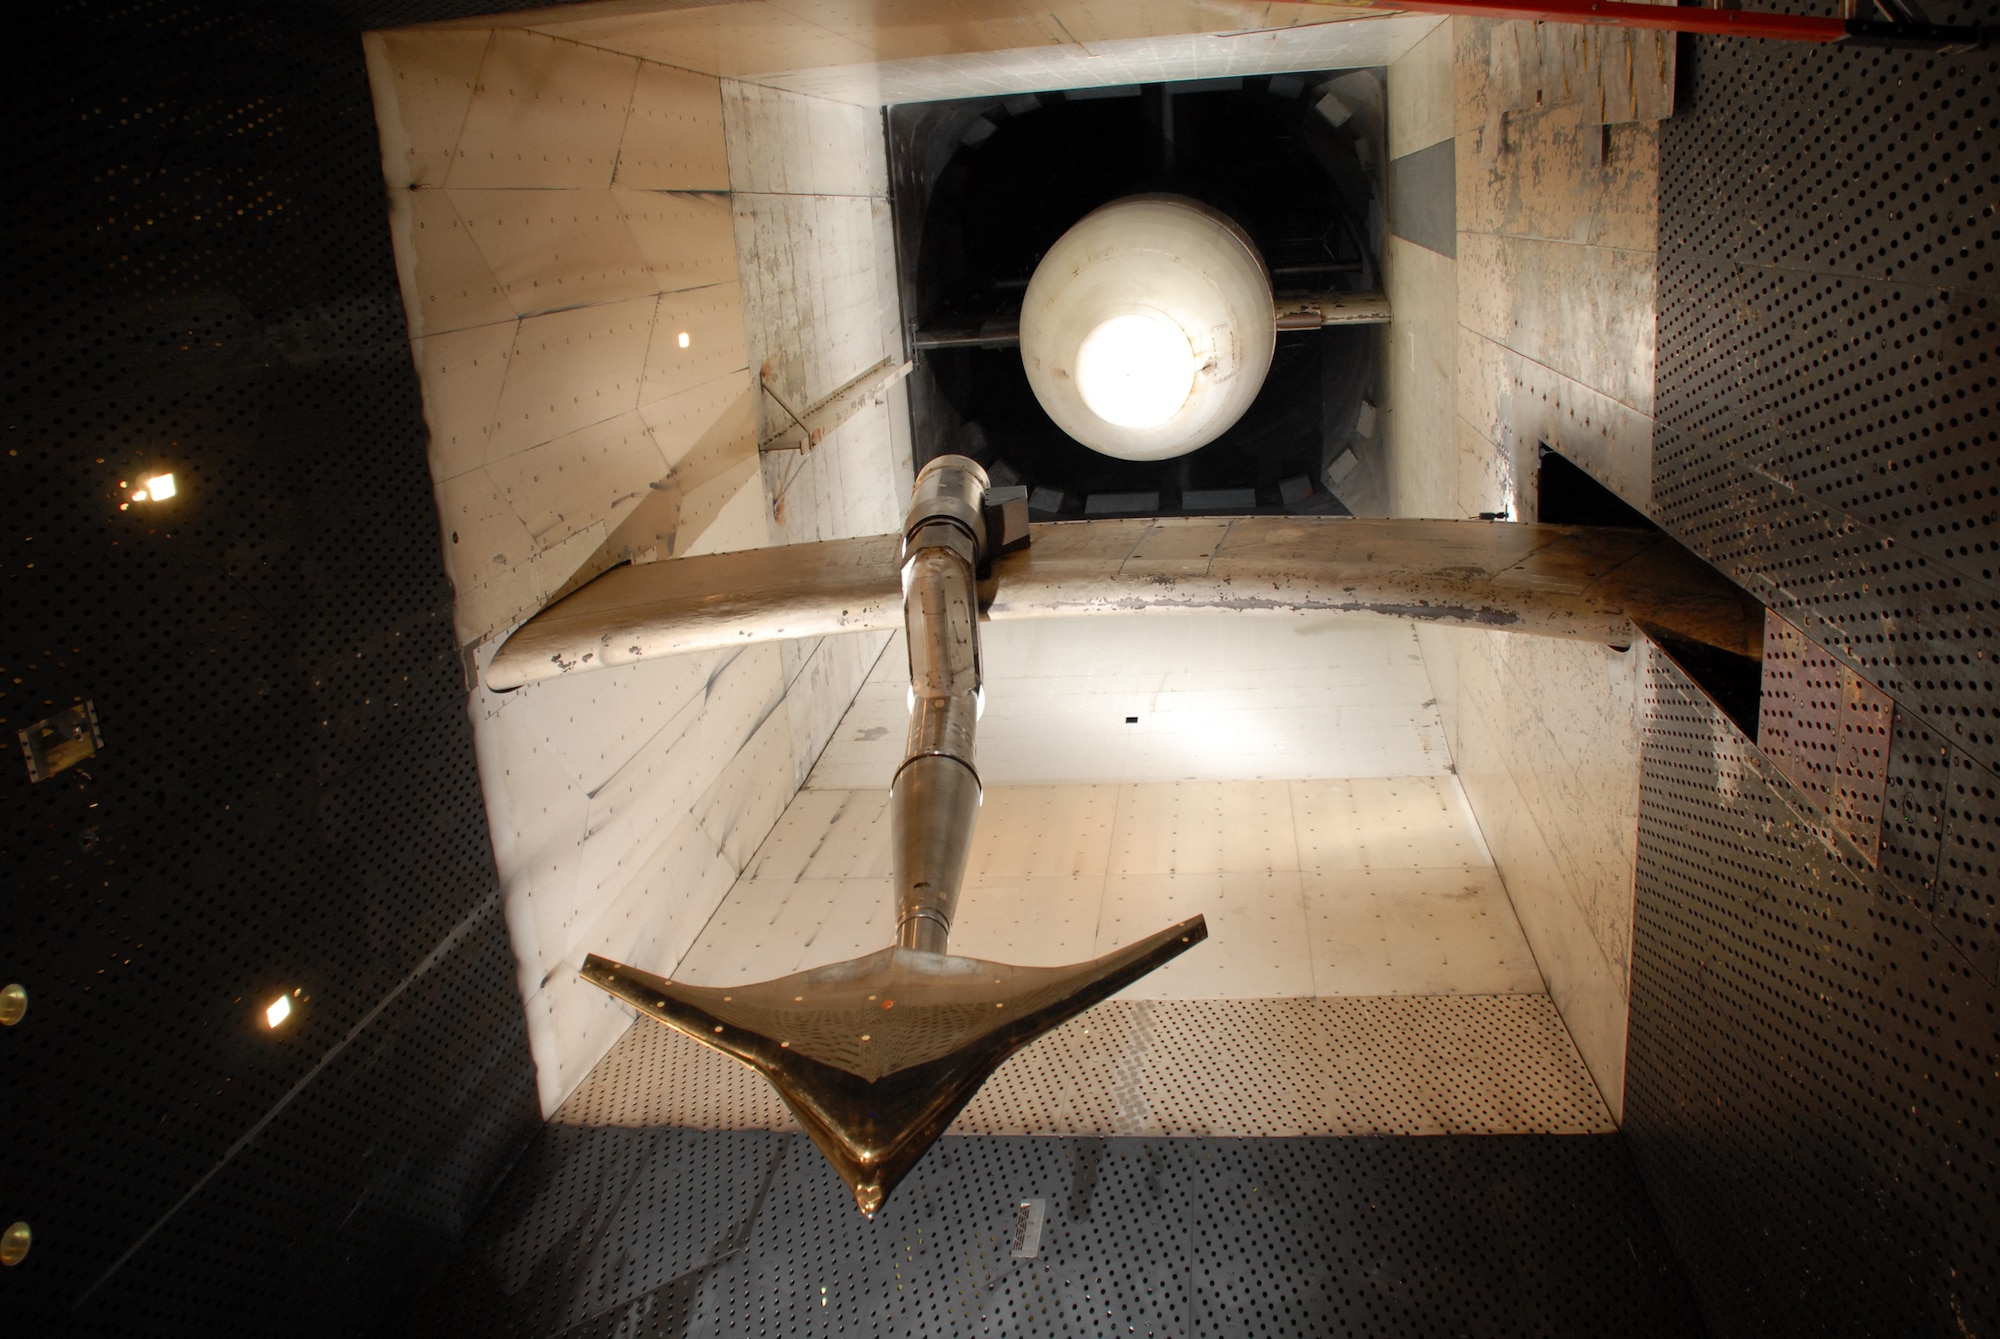 Arnold Engineering Development Center recently concluded aerodynamic tests on this two-percent model of the BWB aircraft in the center's 16 foot transonic wind tunnel. 